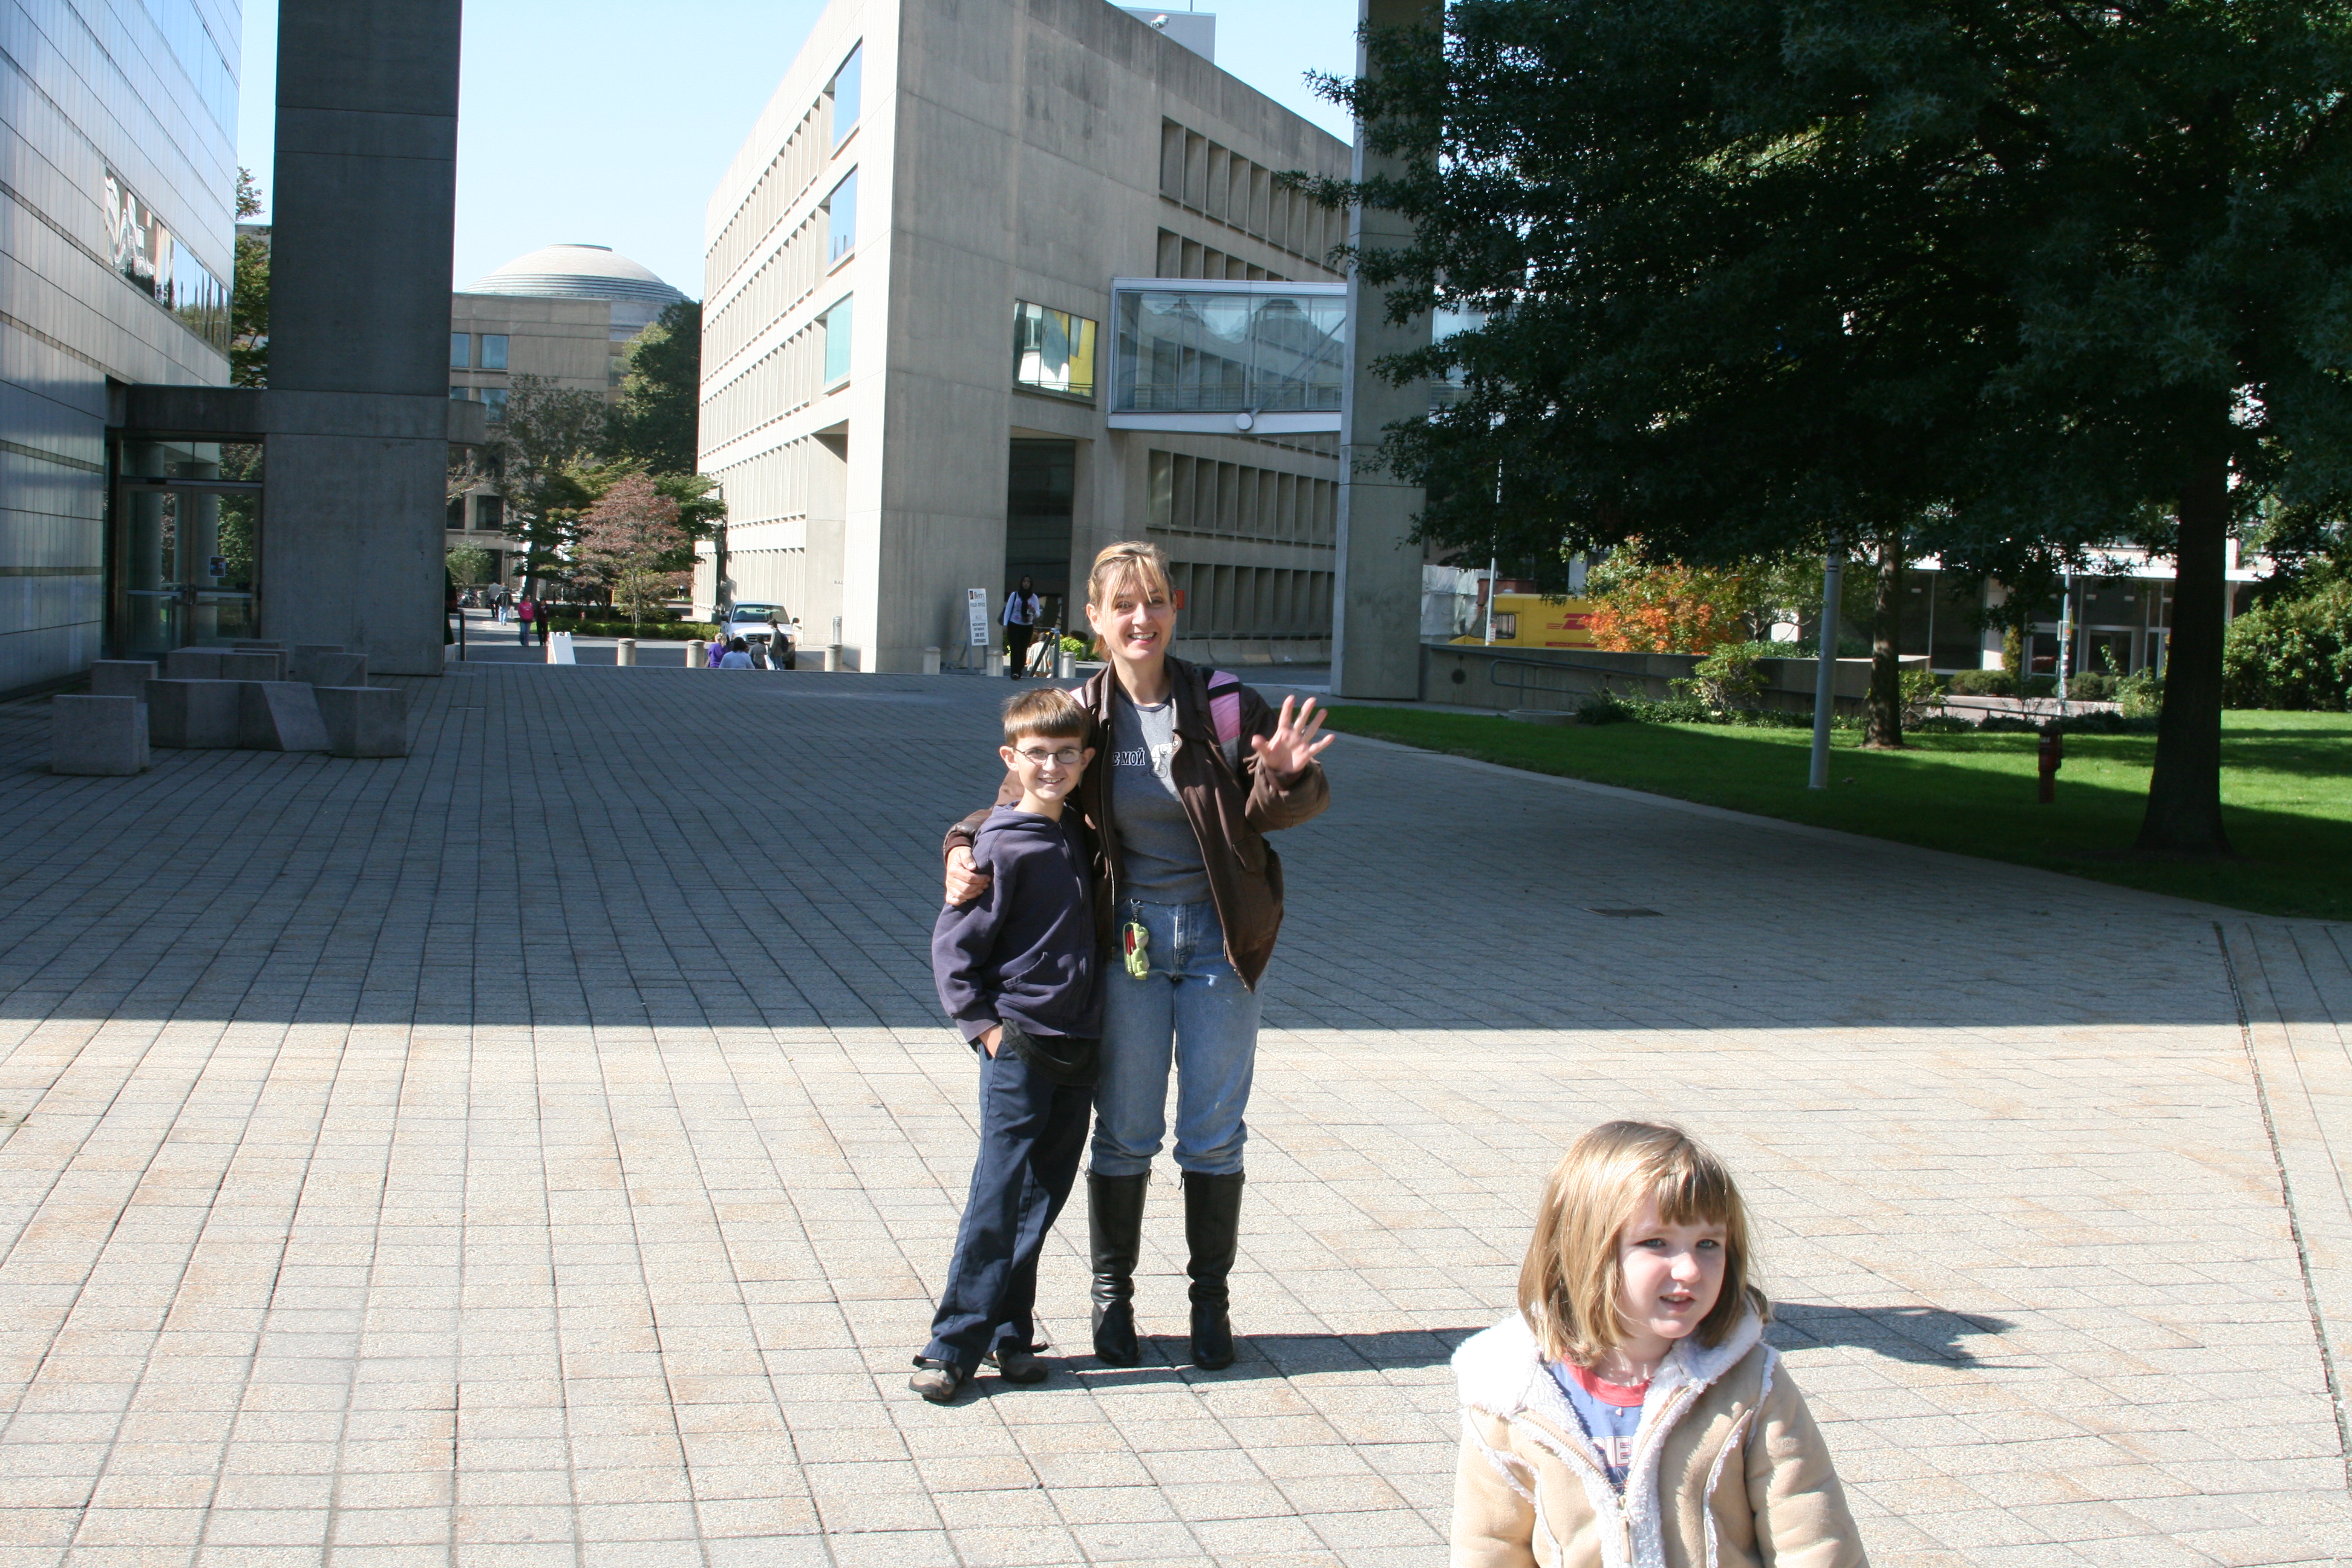 Neil, Carolyn, and Kelly at MIT